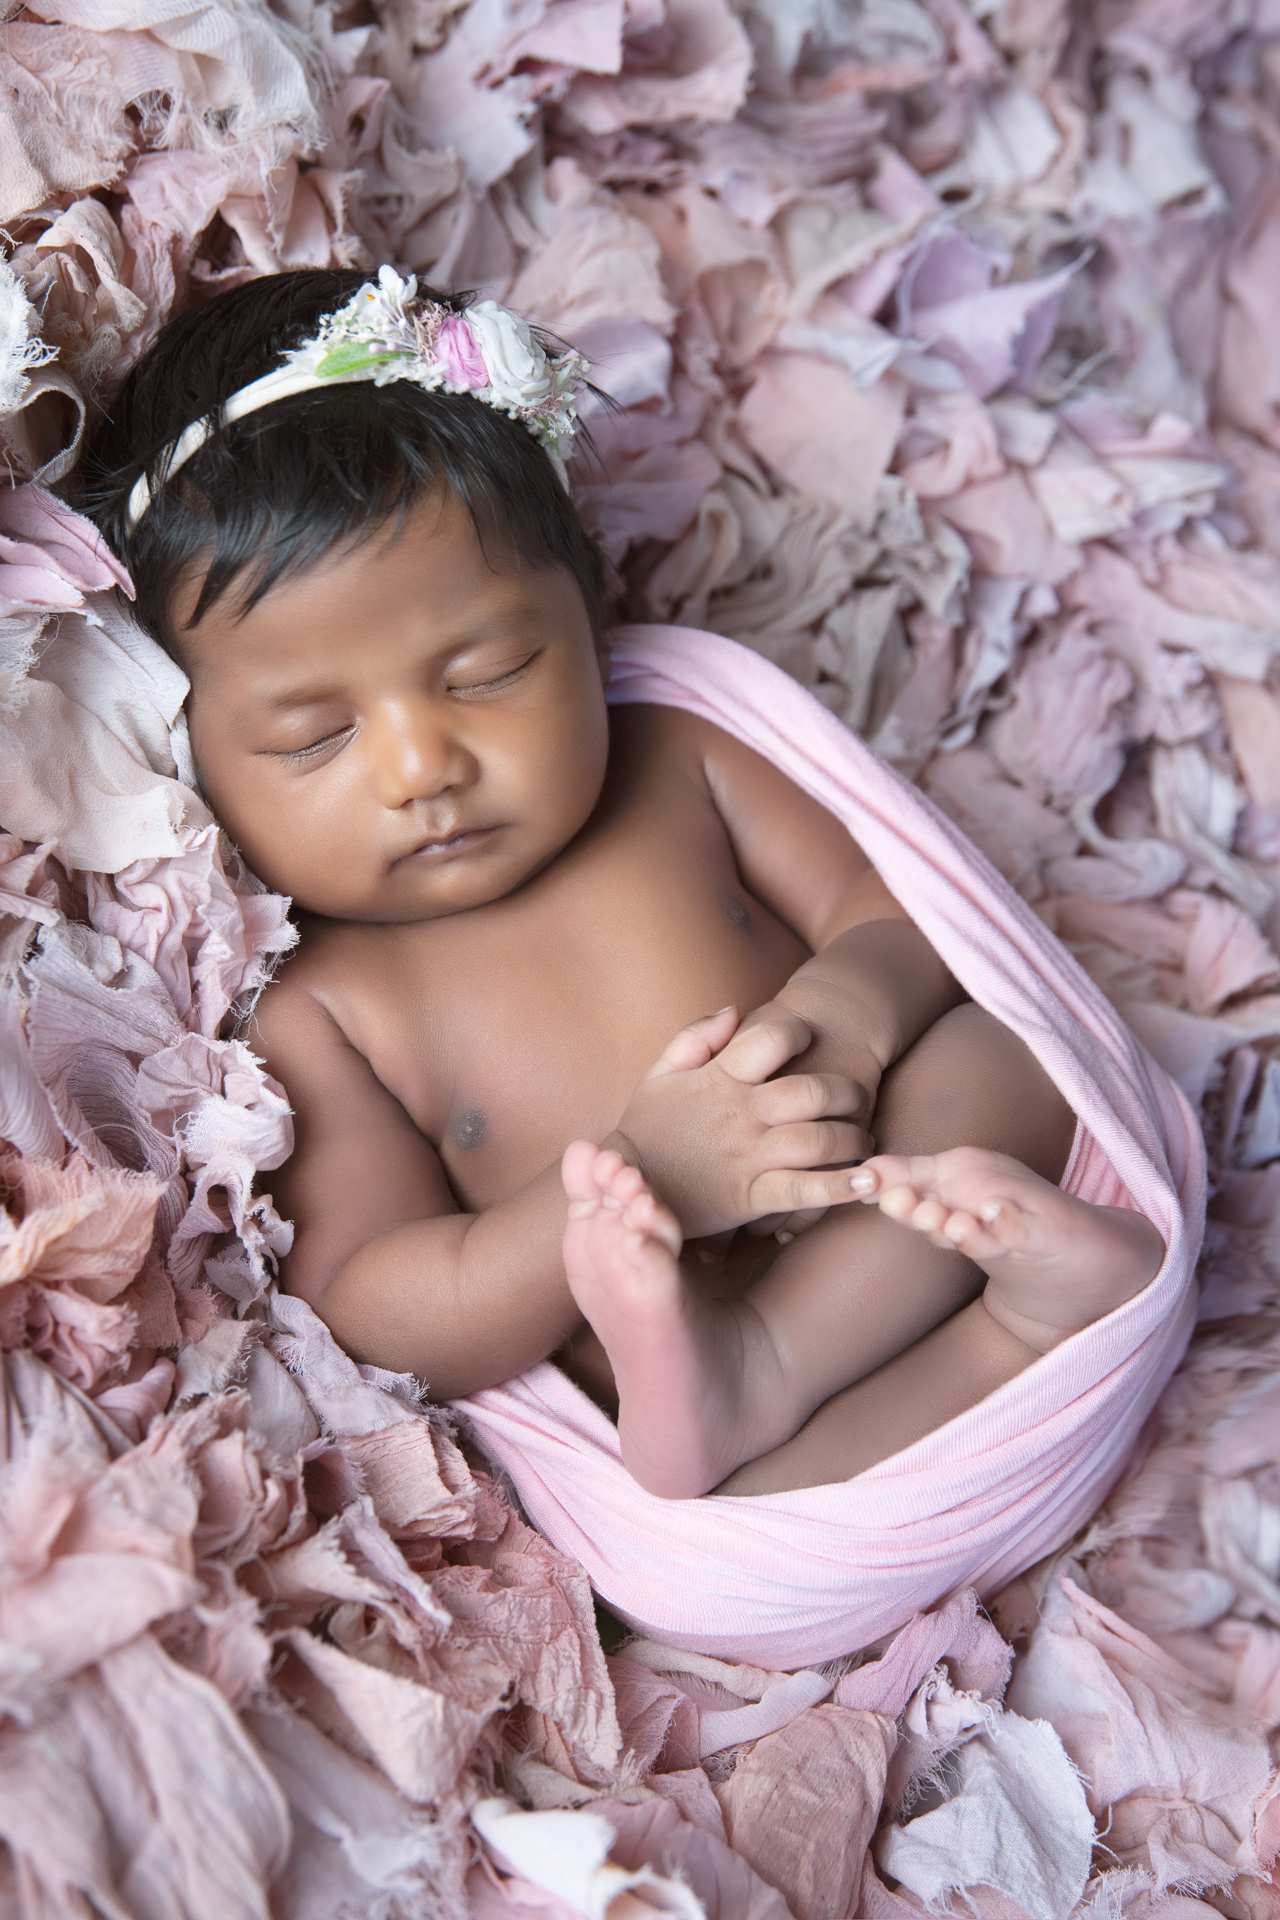 Newborn baby sleeping while wearing beige and pink headband. Pink tones color decorative carpeted on background.